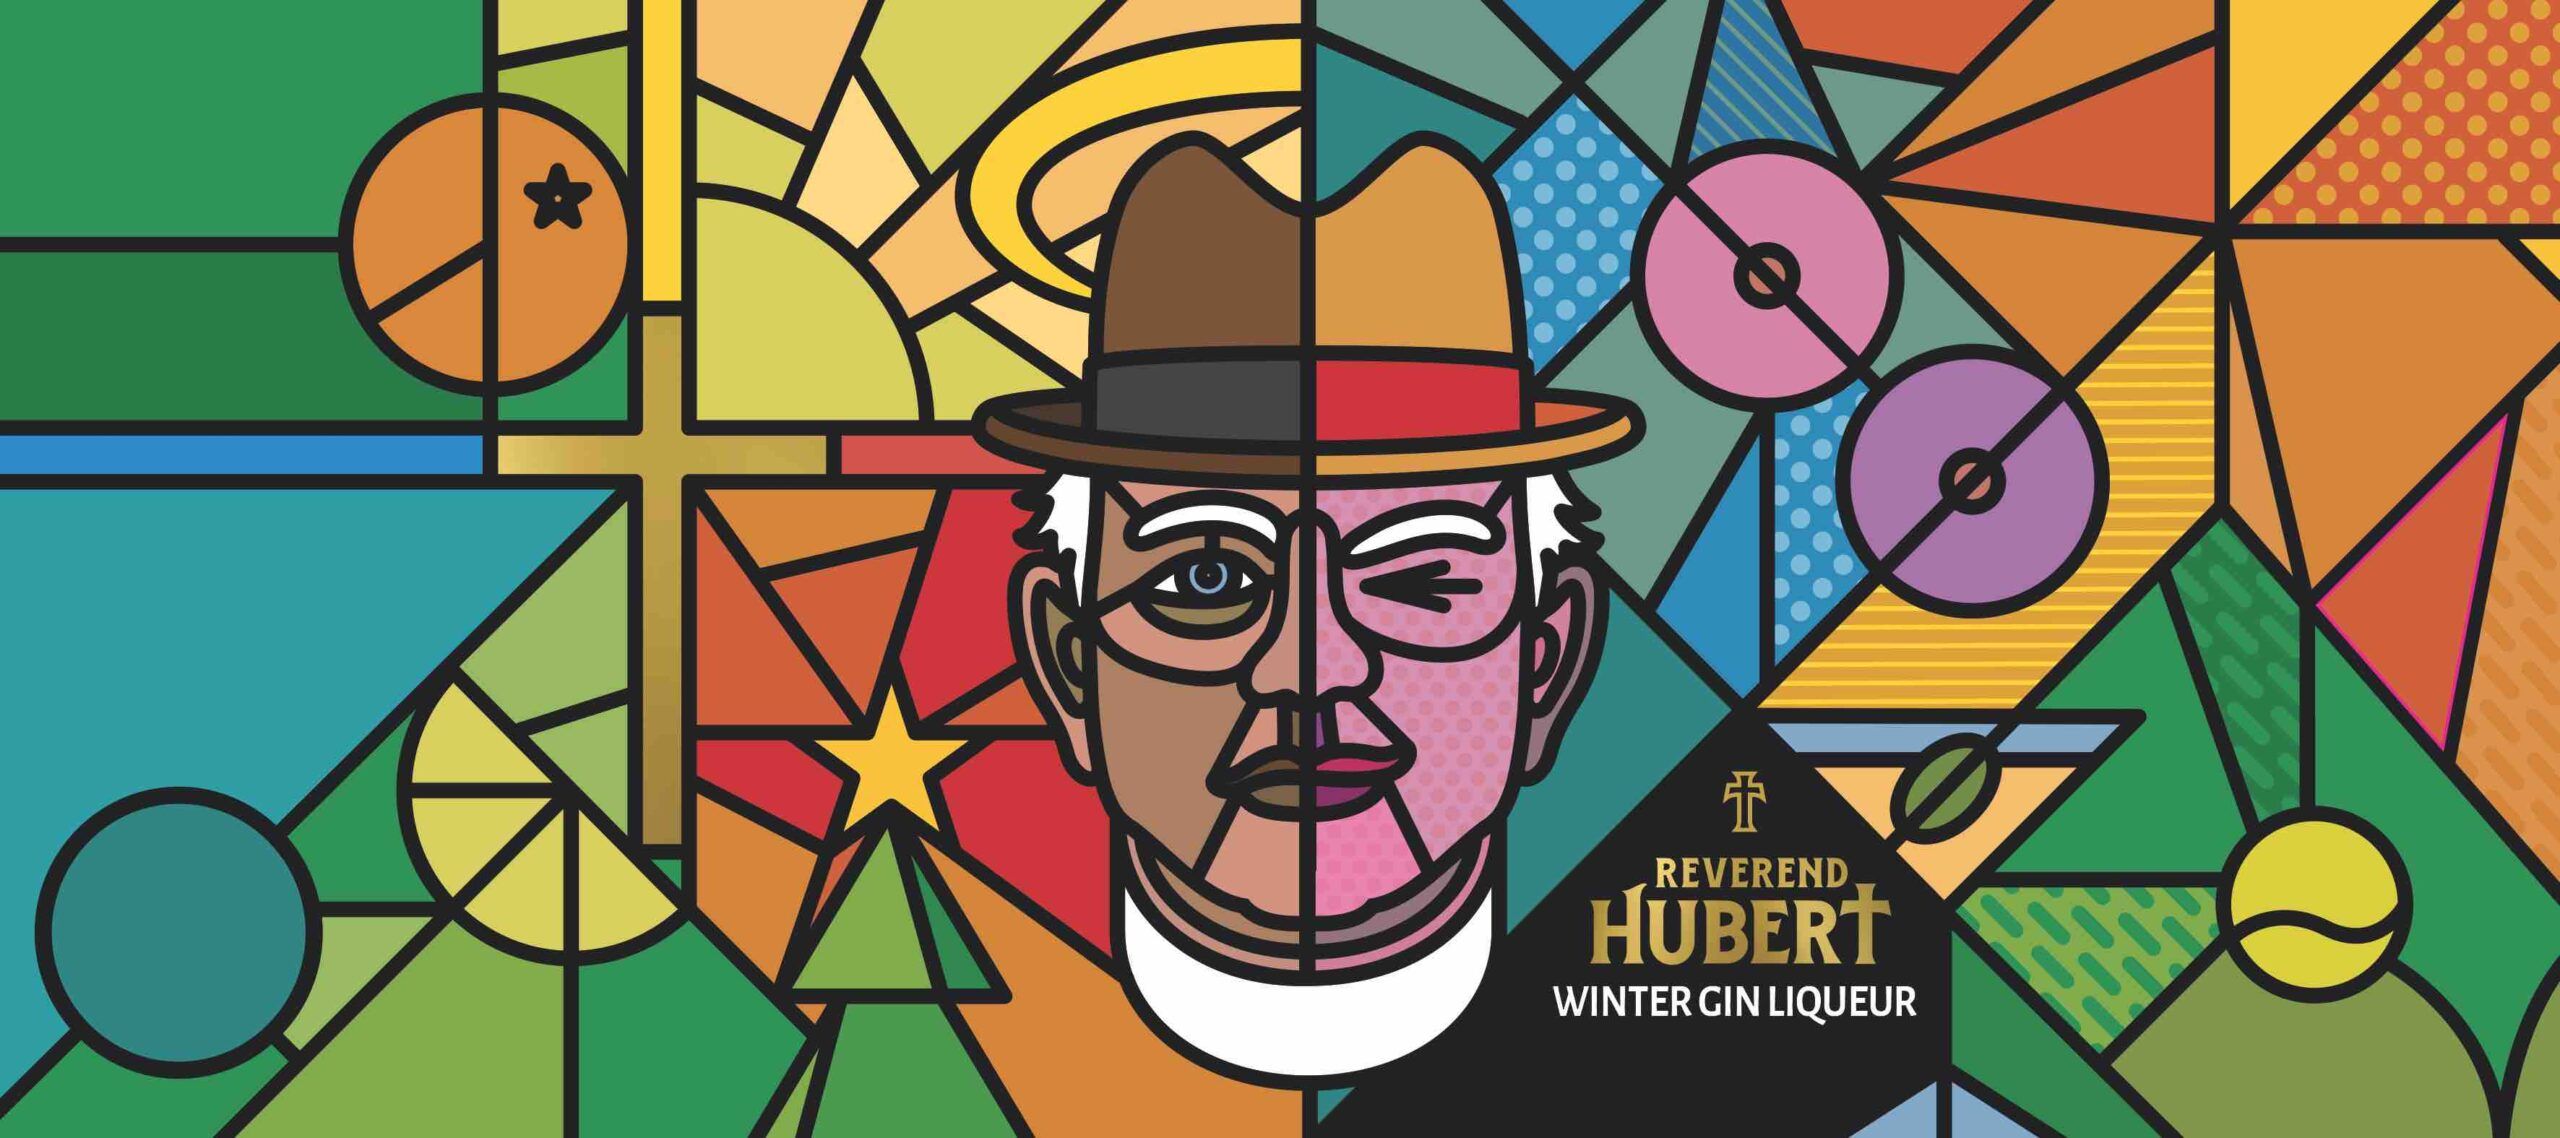 Introducing you to Reverend Hubert and his winter gin liqueur